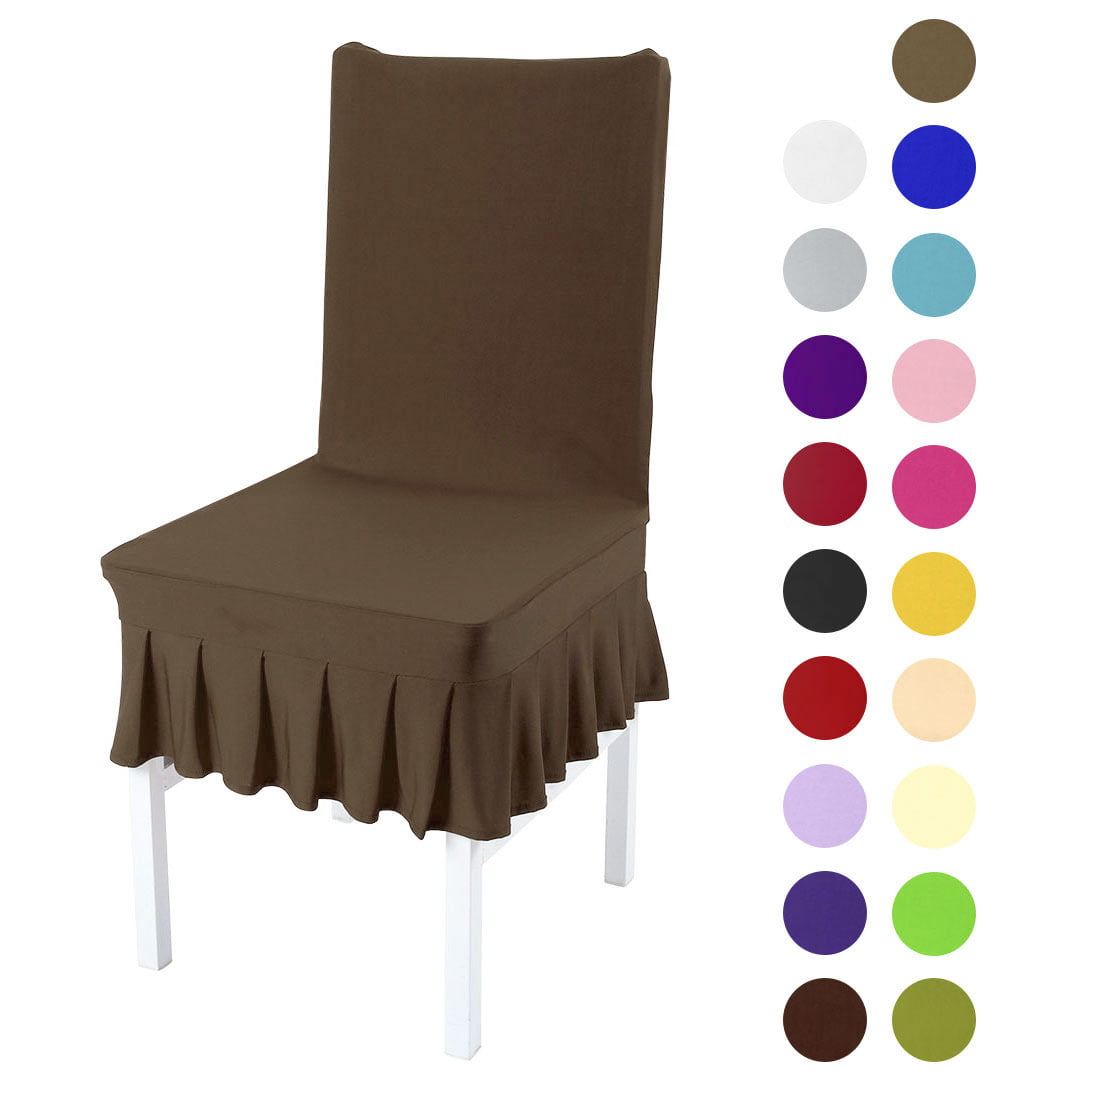 Details about   Spandex Stretch Dining Chair Cover Jacquard Seat Slipcover Wedding Banquet Party 